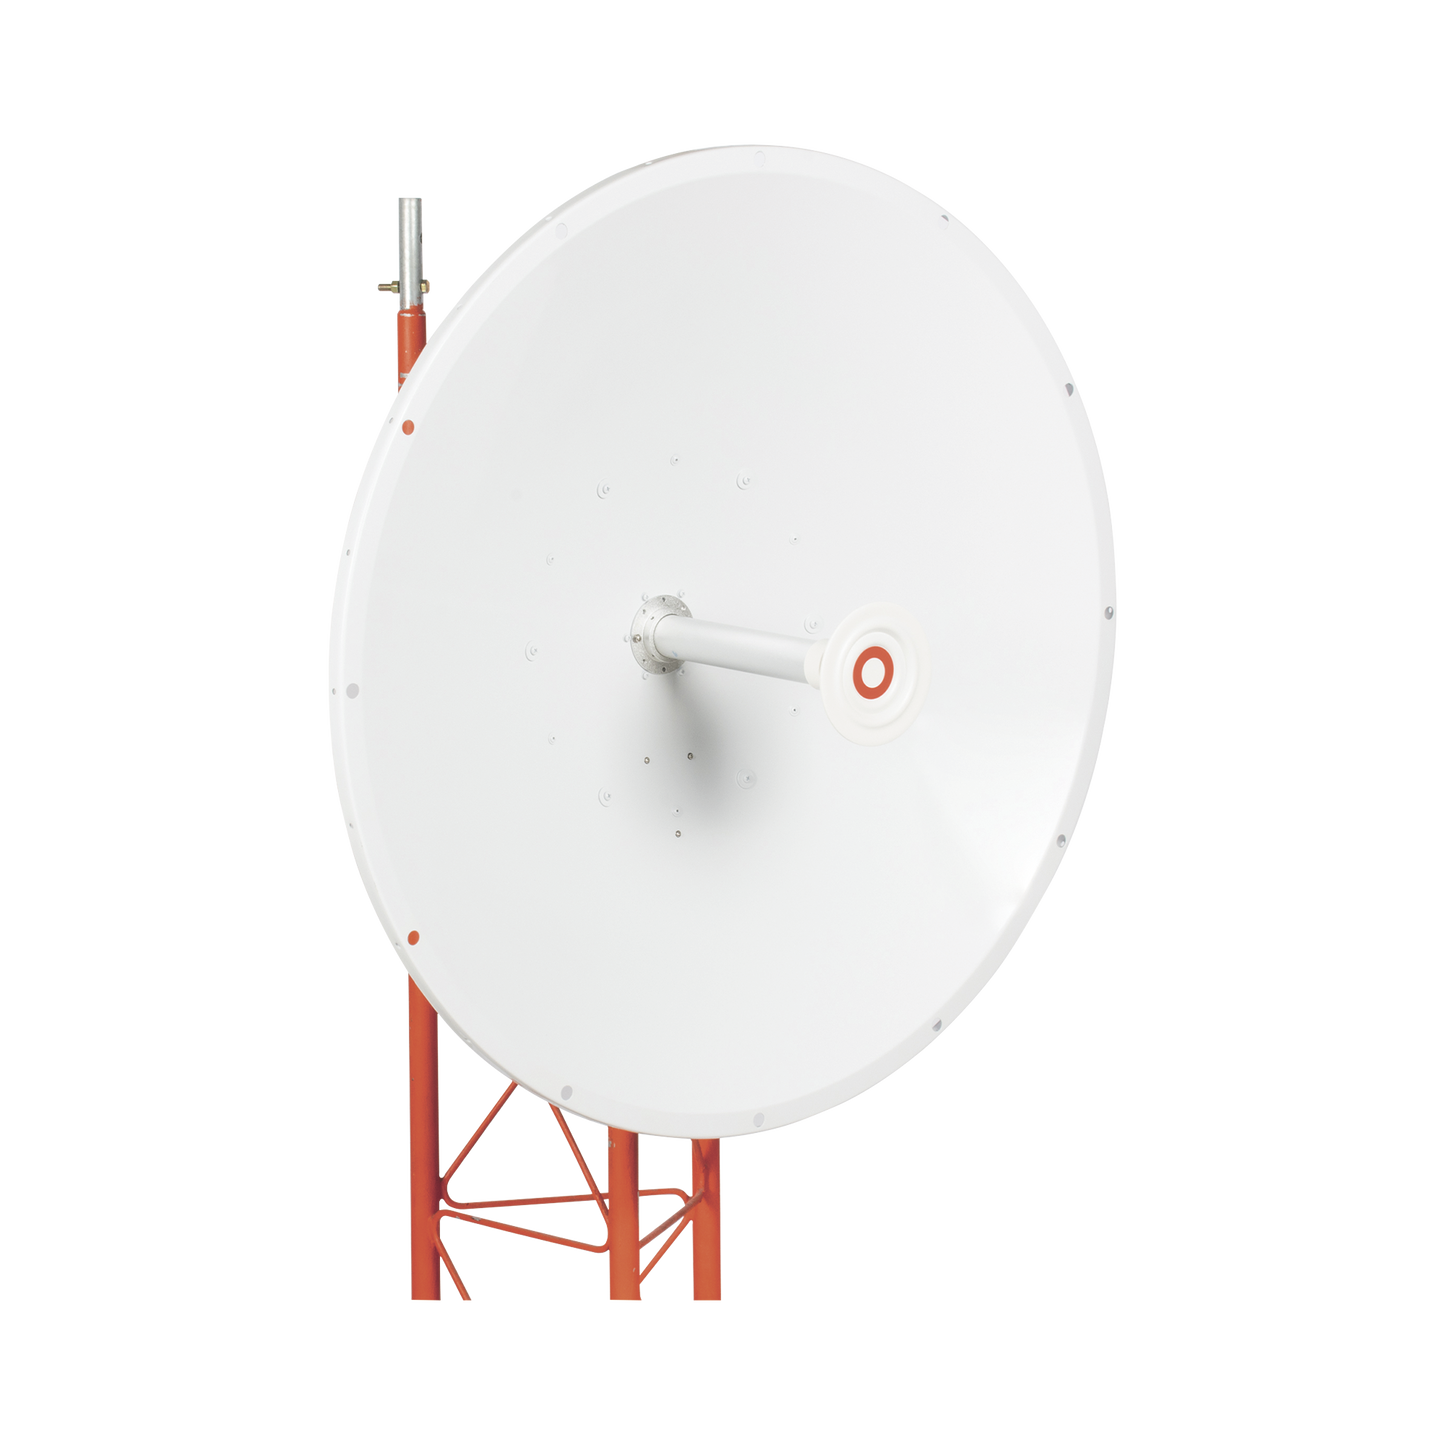 Directional antenna, 34 dBi gain, frequency range (4.9 - 5.8 MHz), 2 N-female connectors